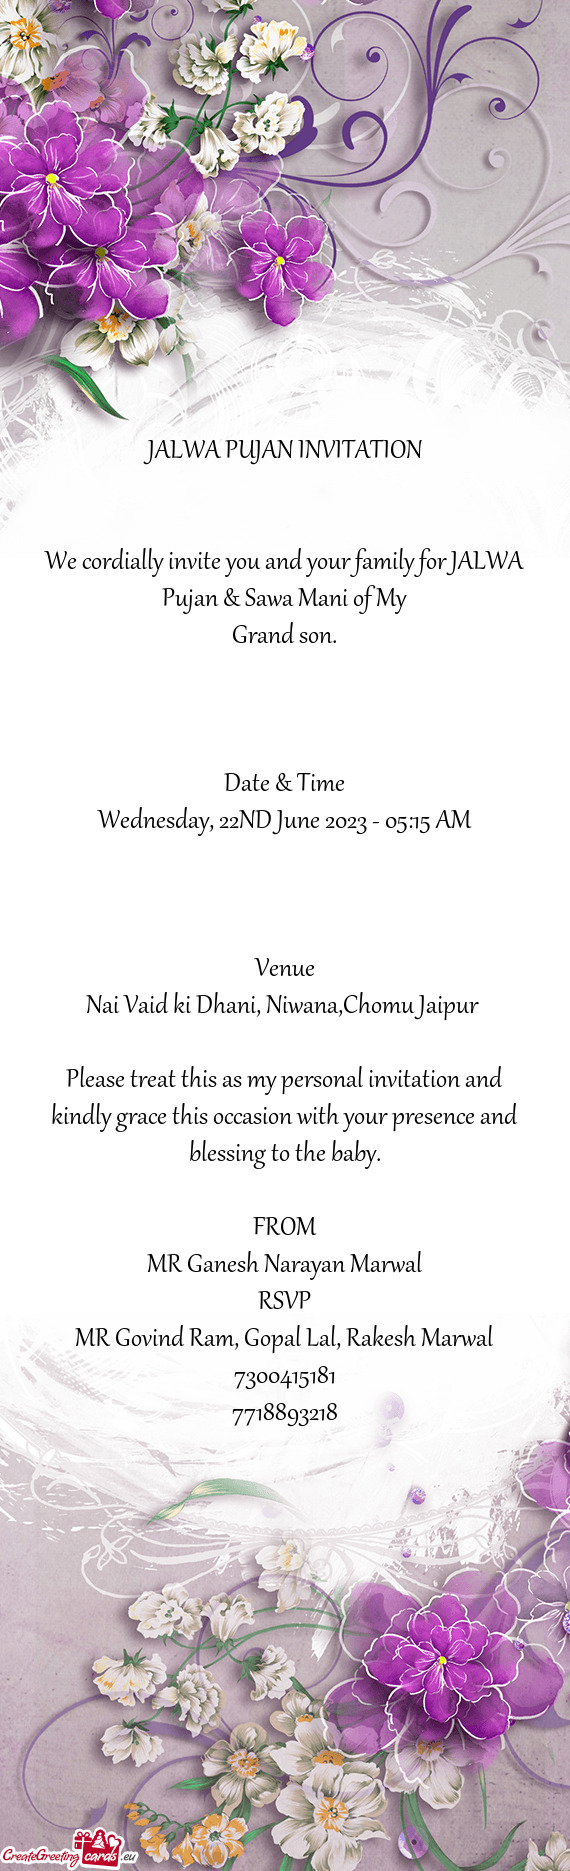 We cordially invite you and your family for JALWA Pujan & Sawa Mani of My